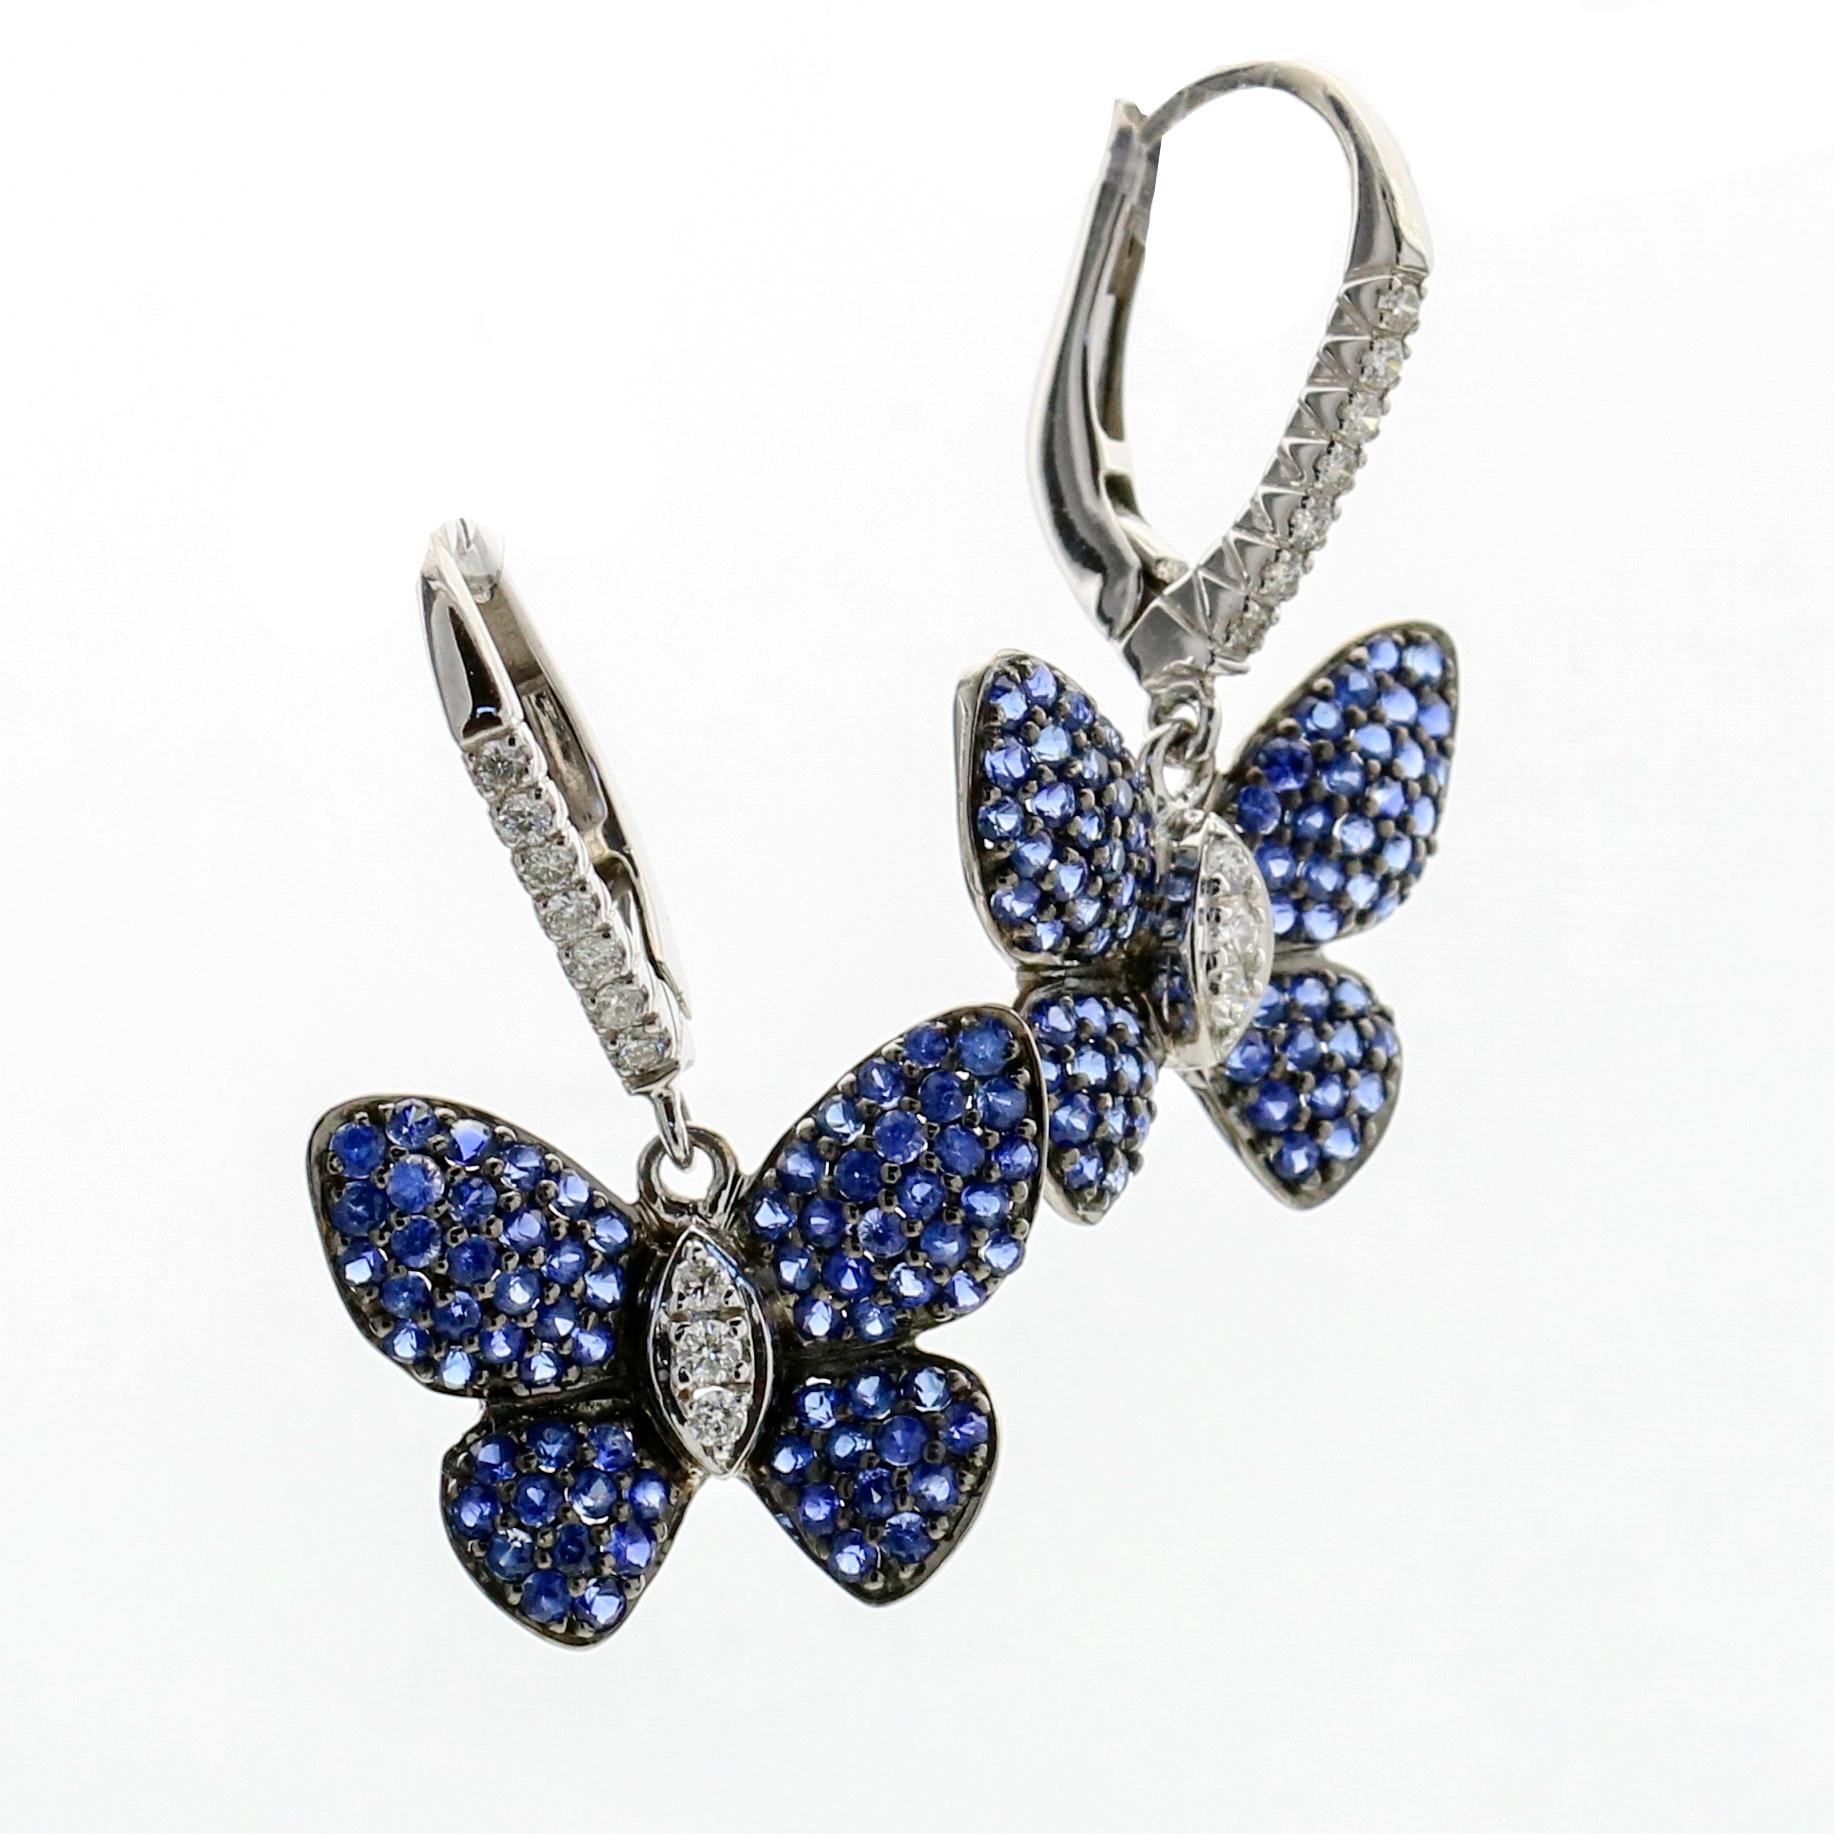 Dangle butterfly earrings in 18-karat white gold with sapphires and diamonds. The butterflies dangle from a polished metal lever-back with diamond accents. Butterfly wings are pave-set with round-cut natural blue sapphires, and the body has 3